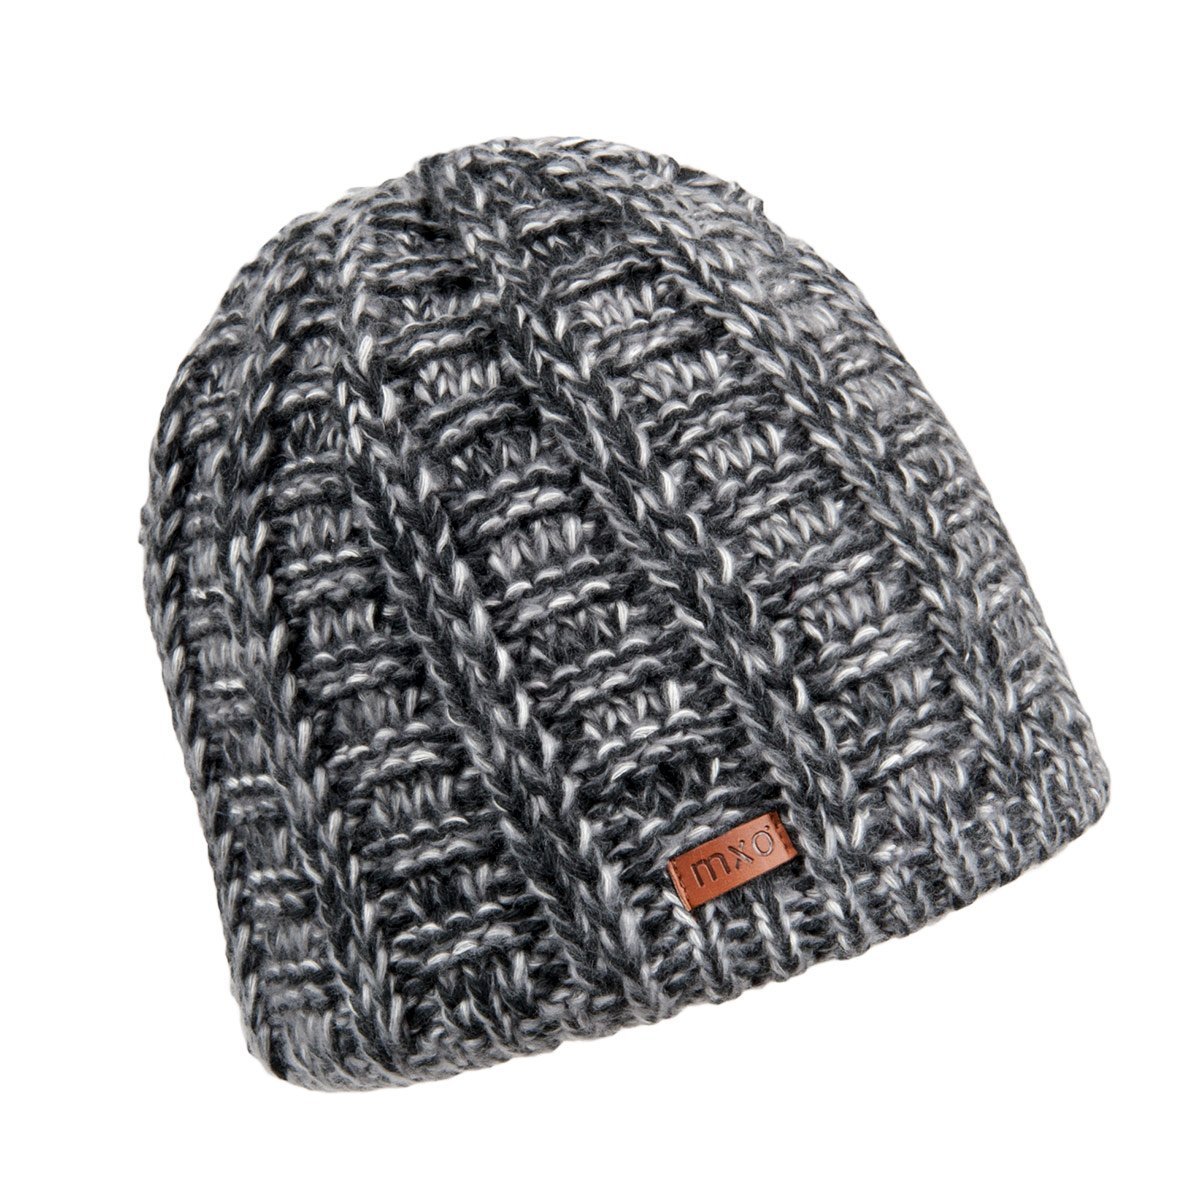 MAXIMO wooly ultrasoft cap with cotton lining --/u003e Online Hatshop for hats, caps, headbands, gloves and scarfs